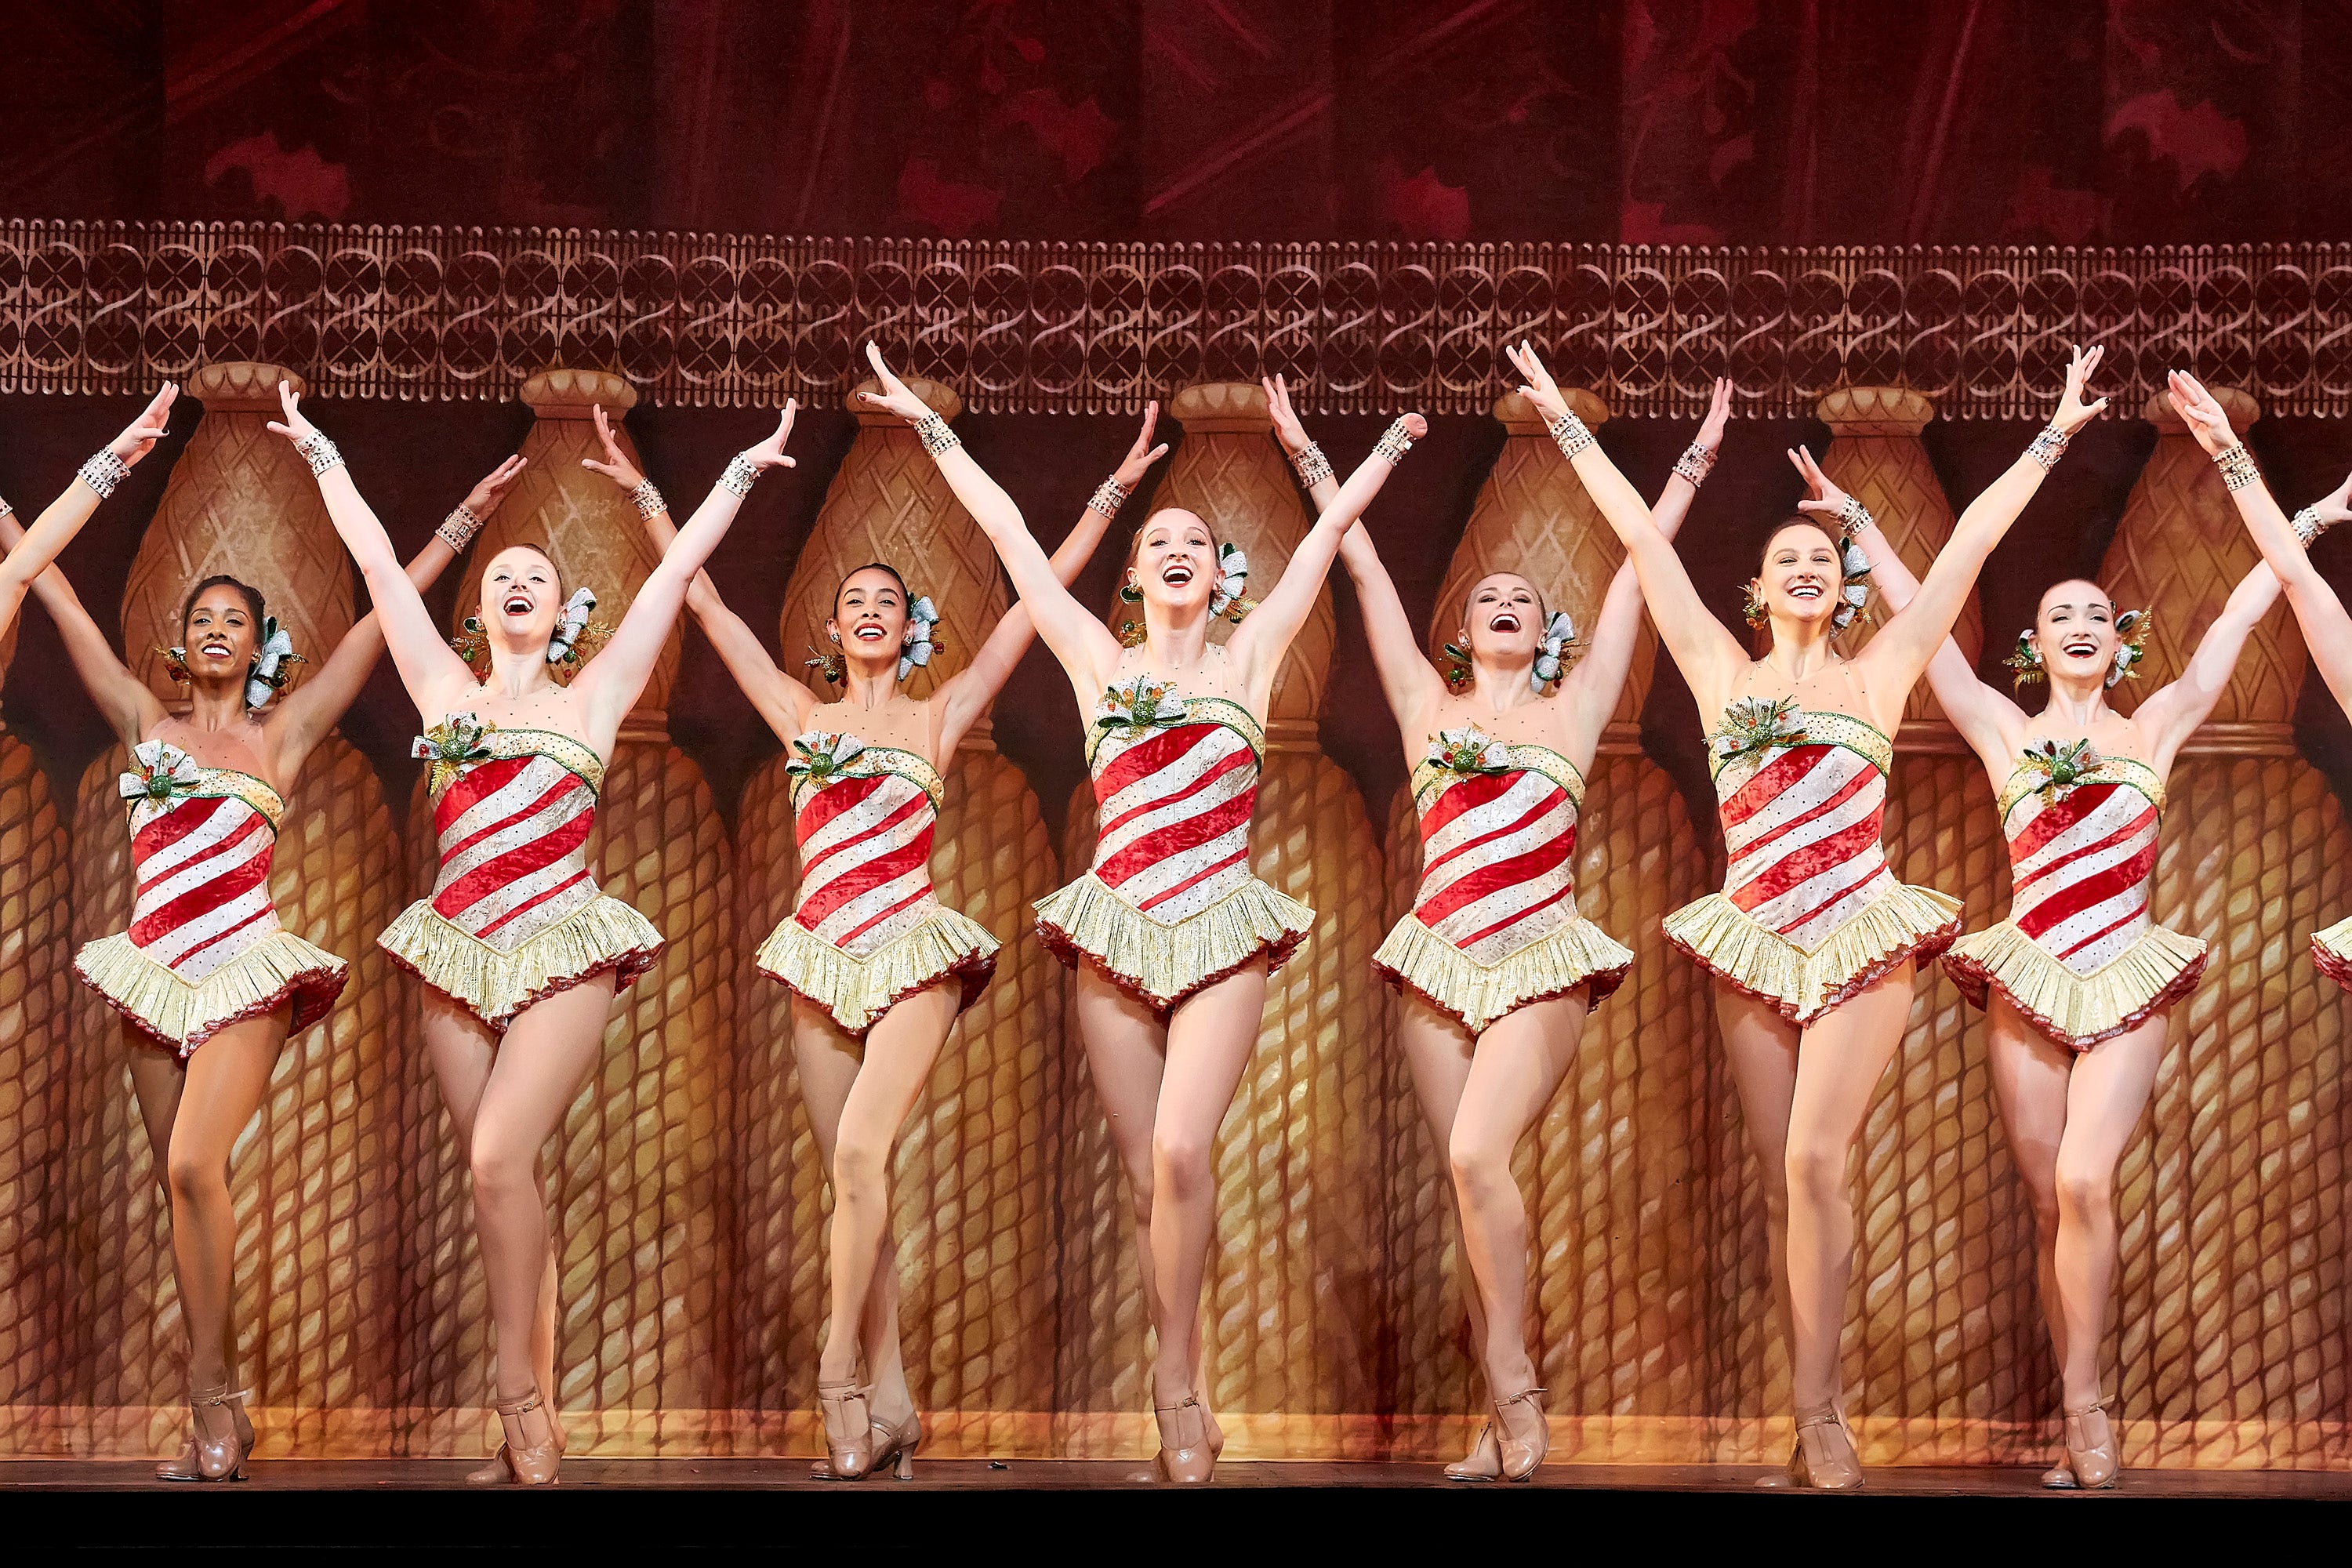 From dreamer to dancer: The spectacular rise of a Radio City Rockette